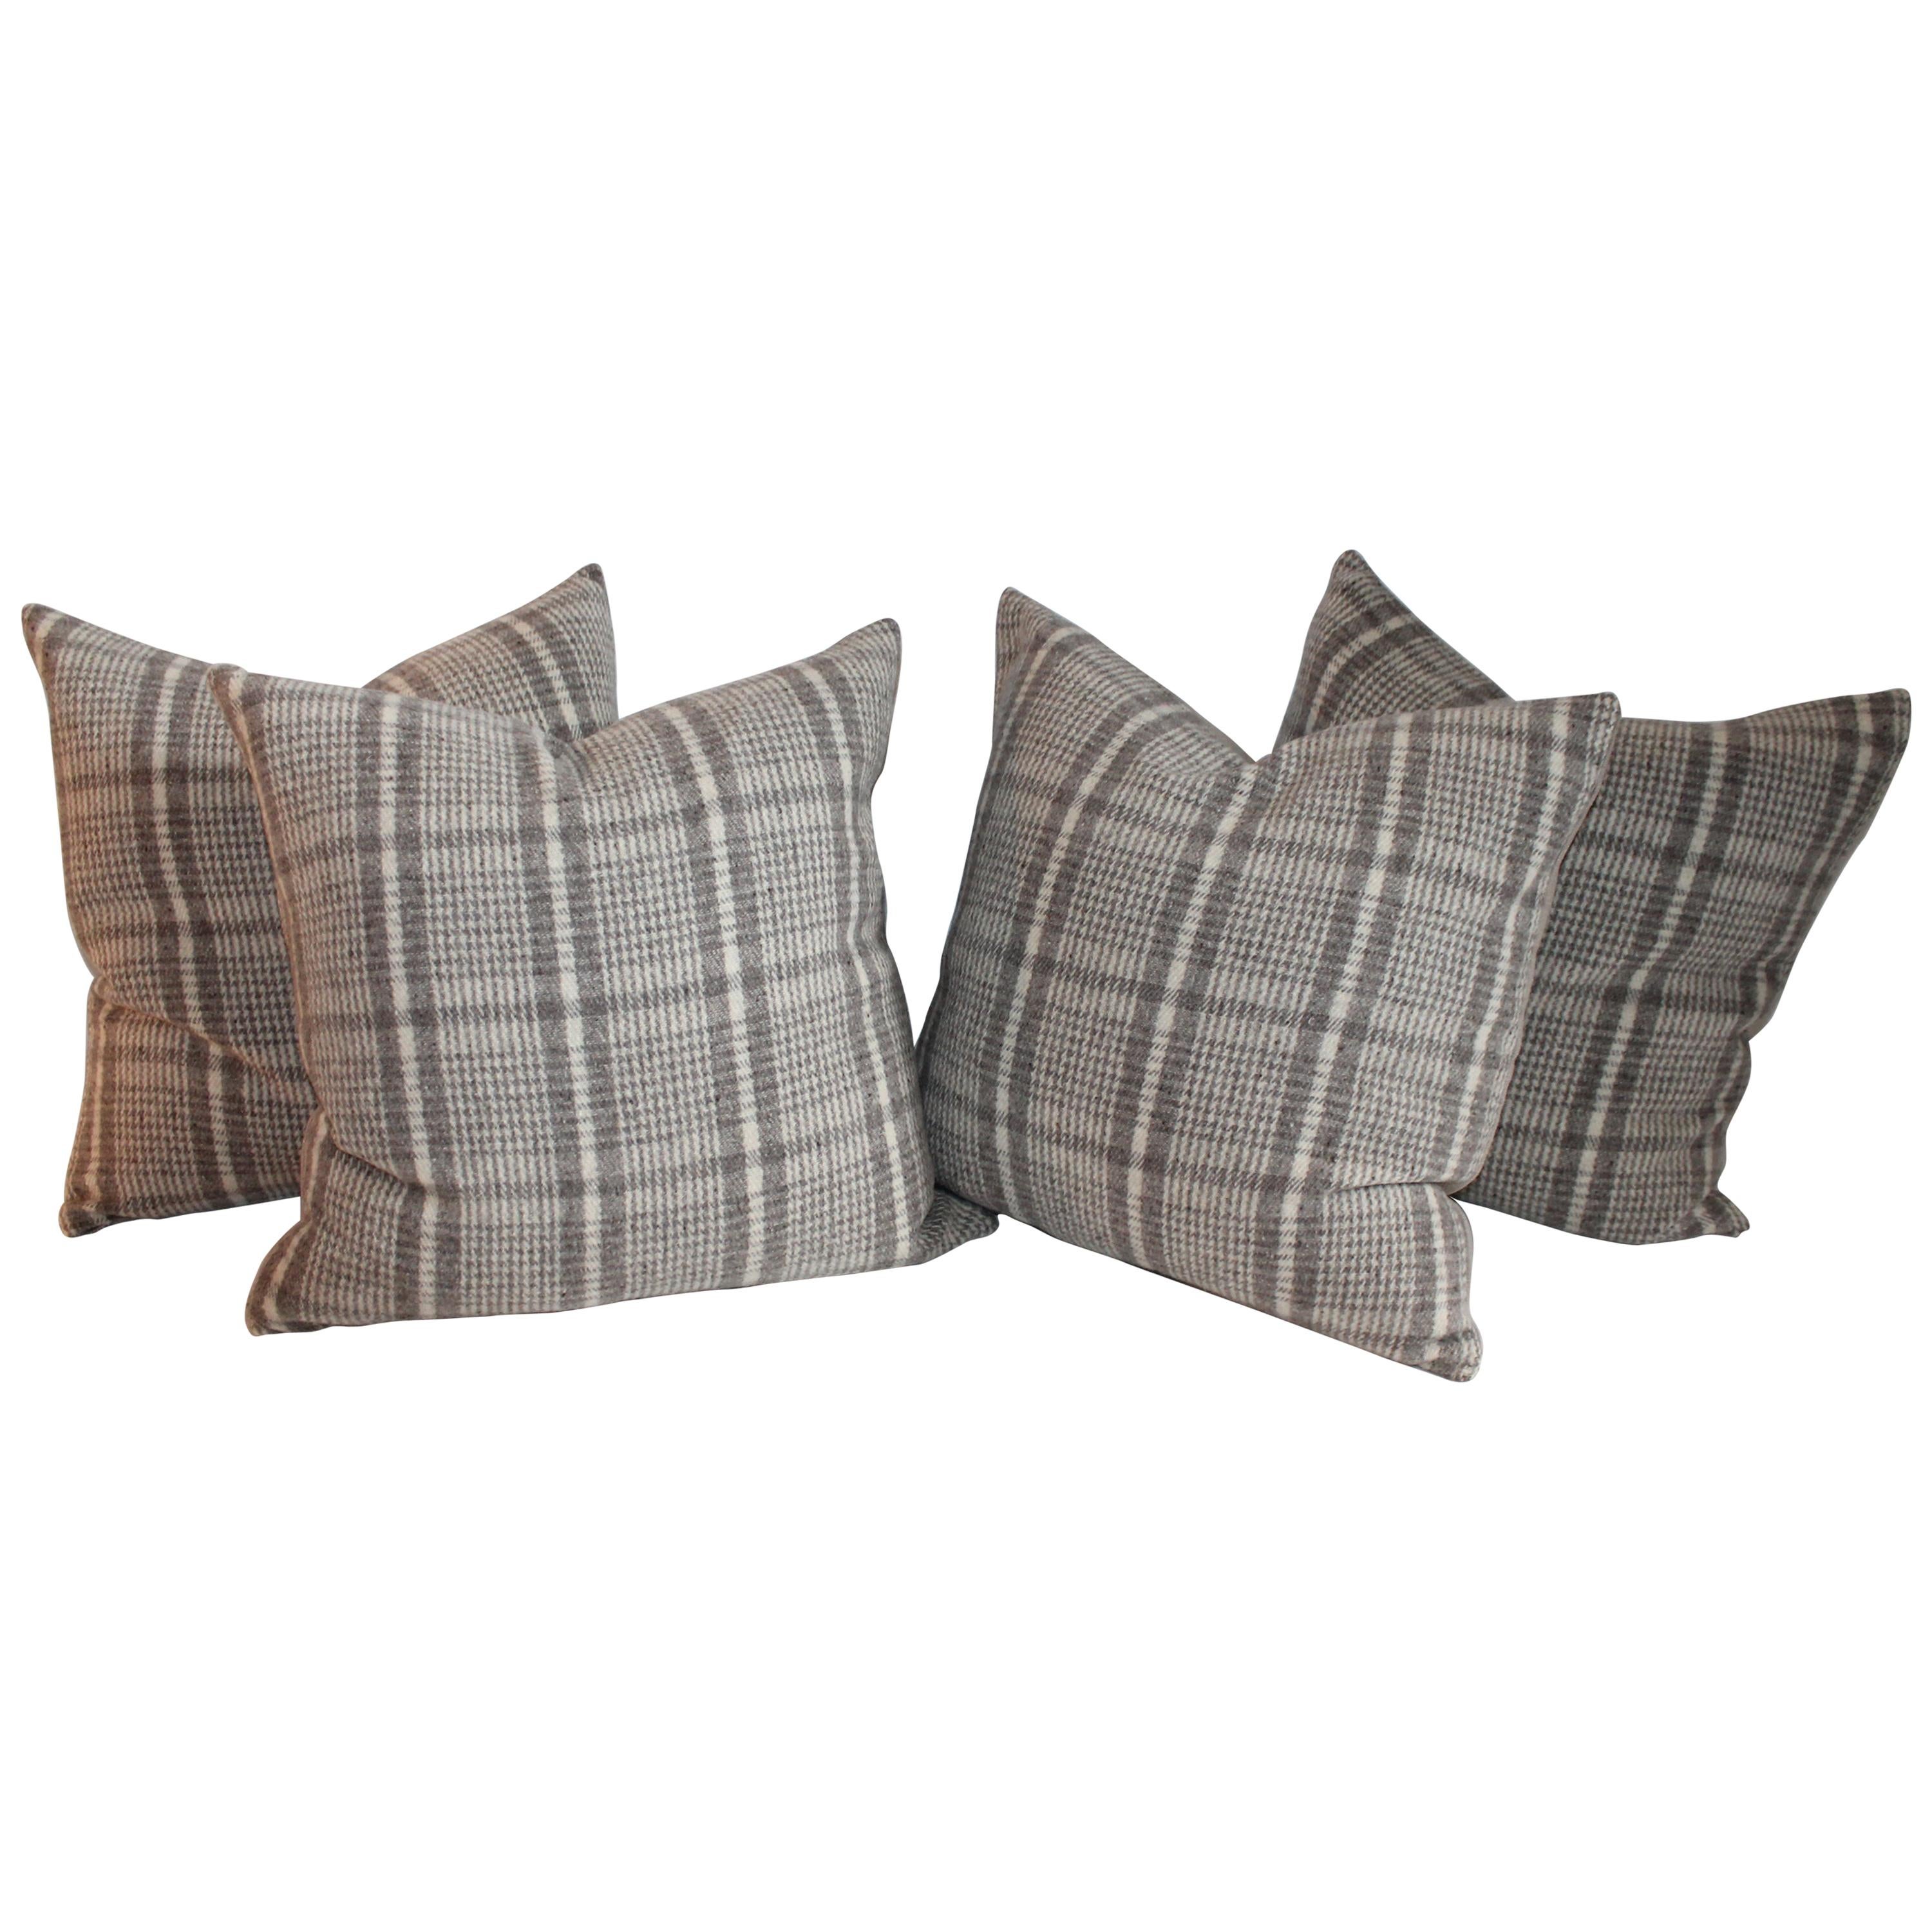 Handwoven Saddle Blanket Pillows, Four For Sale